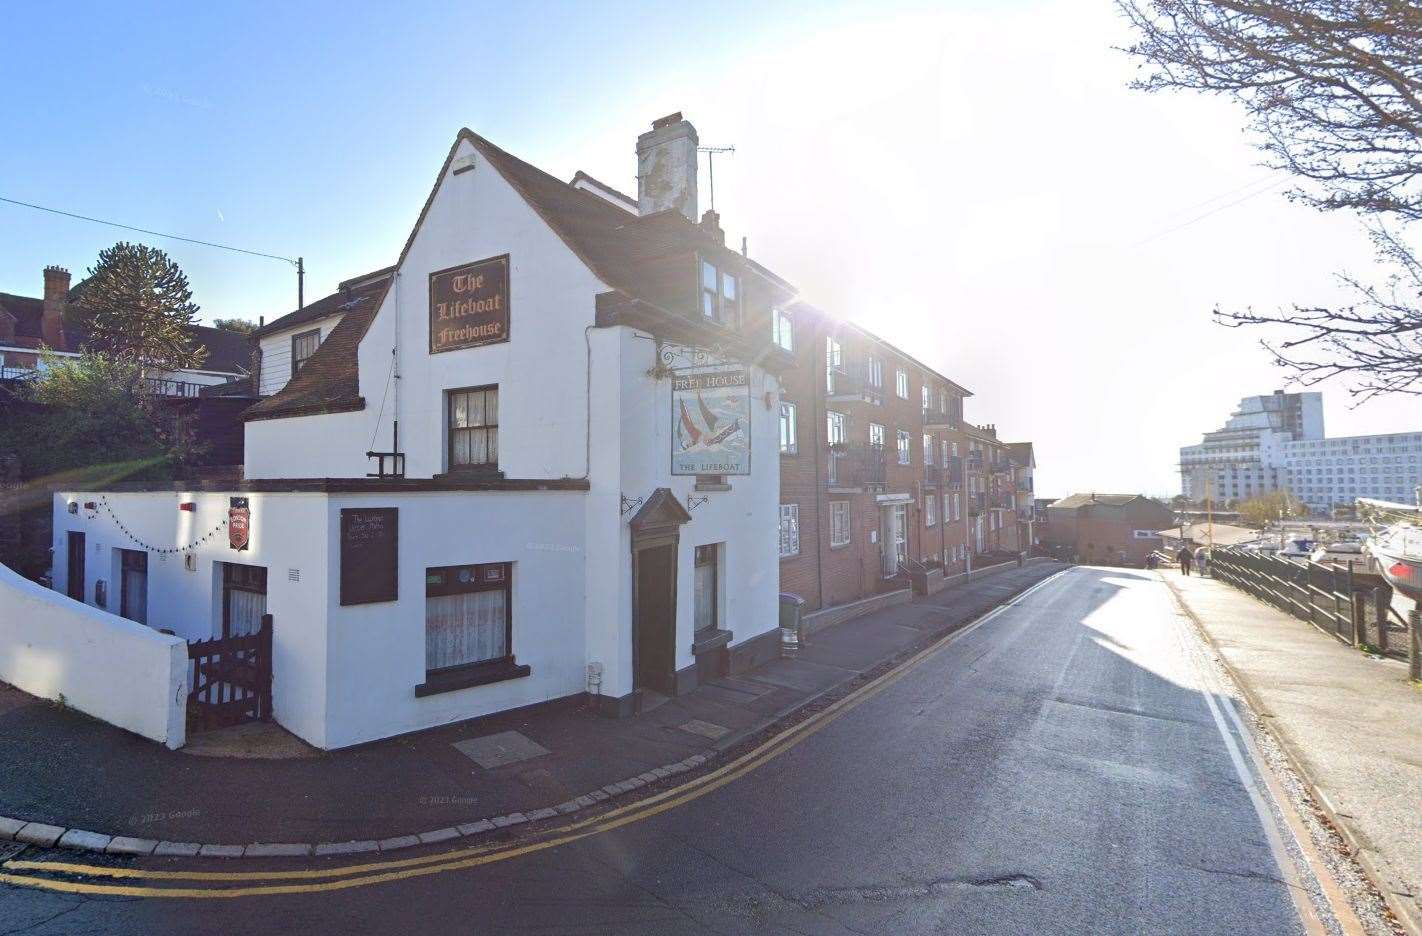 The victim was walking towards the Lifeboat pub in North Street, Folkestone, at the time of the incident. Picture: Google